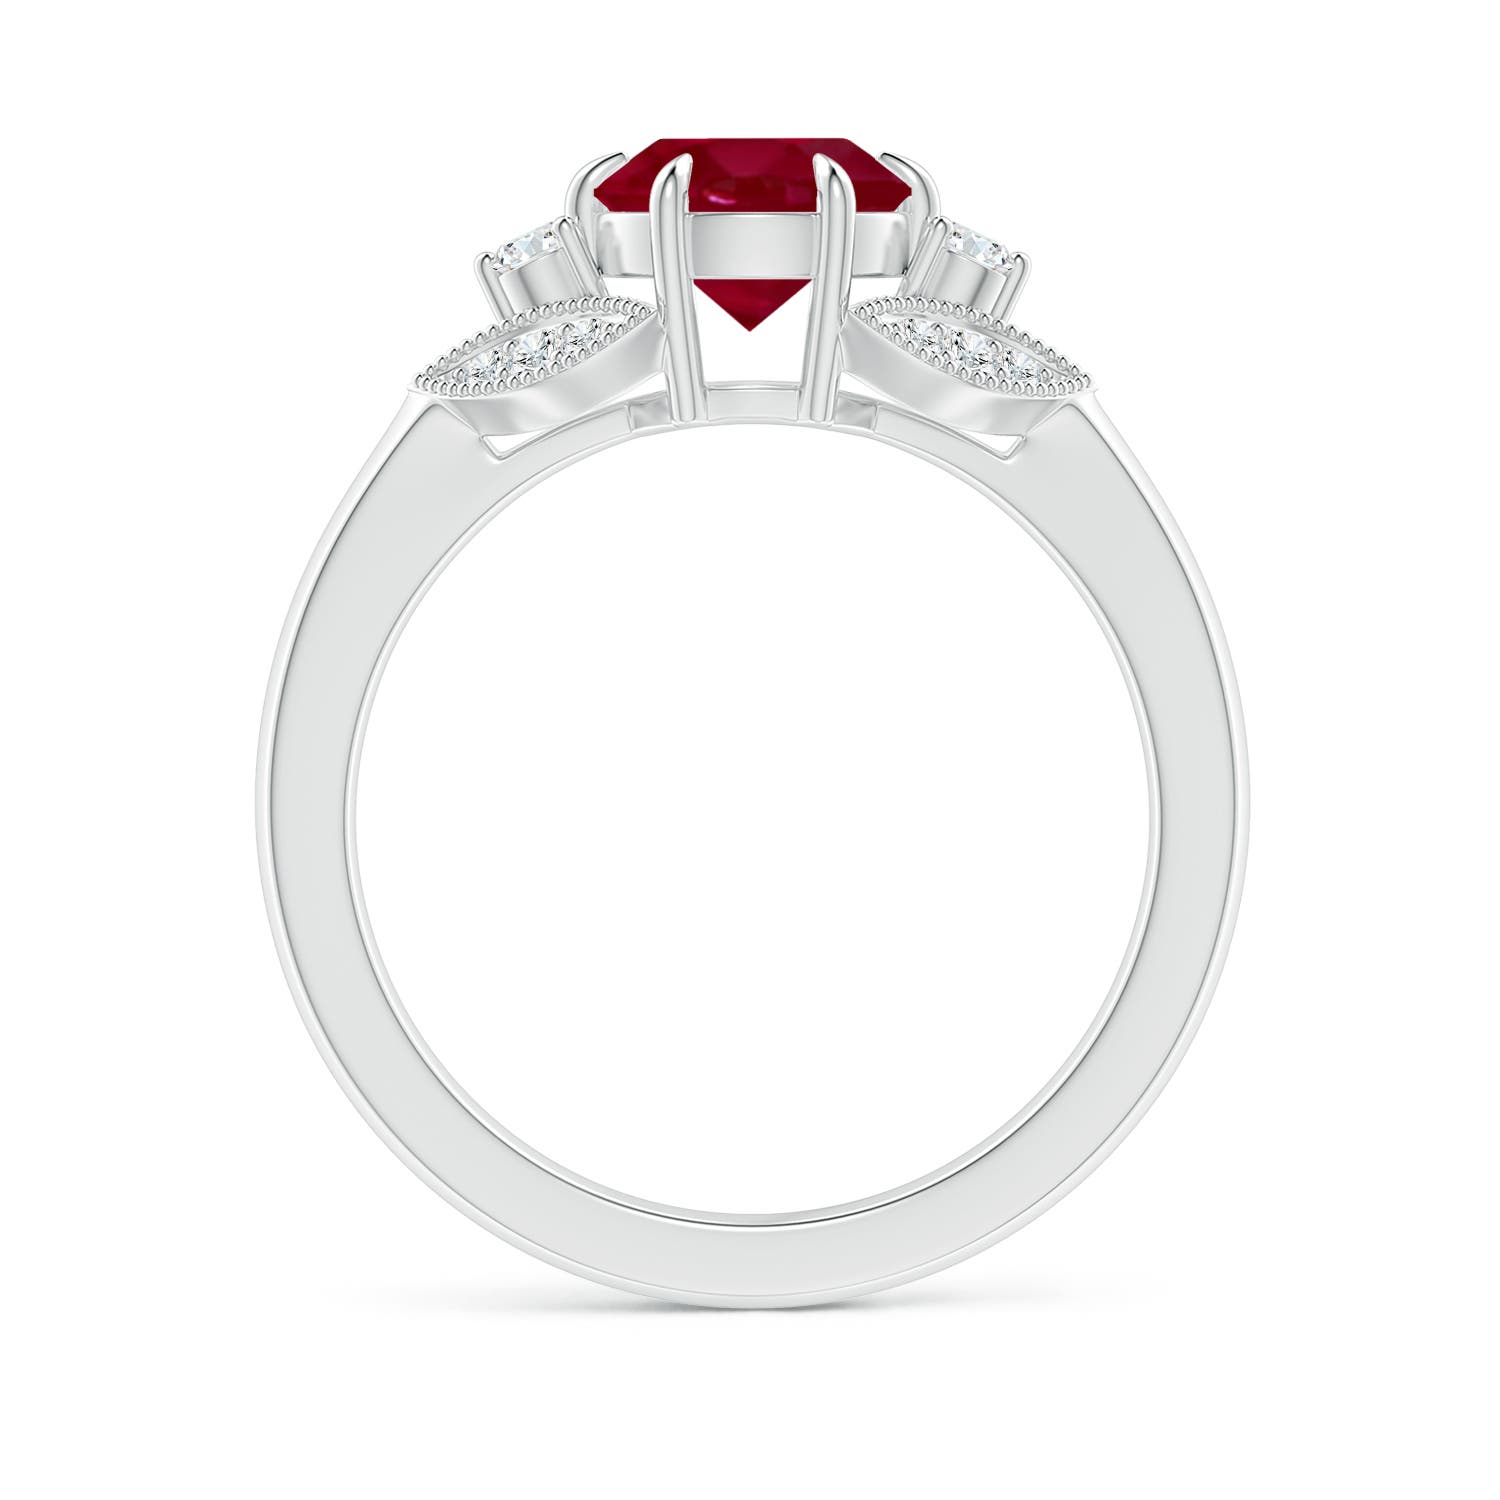 AA - Ruby / 1.64 CT / 14 KT White Gold